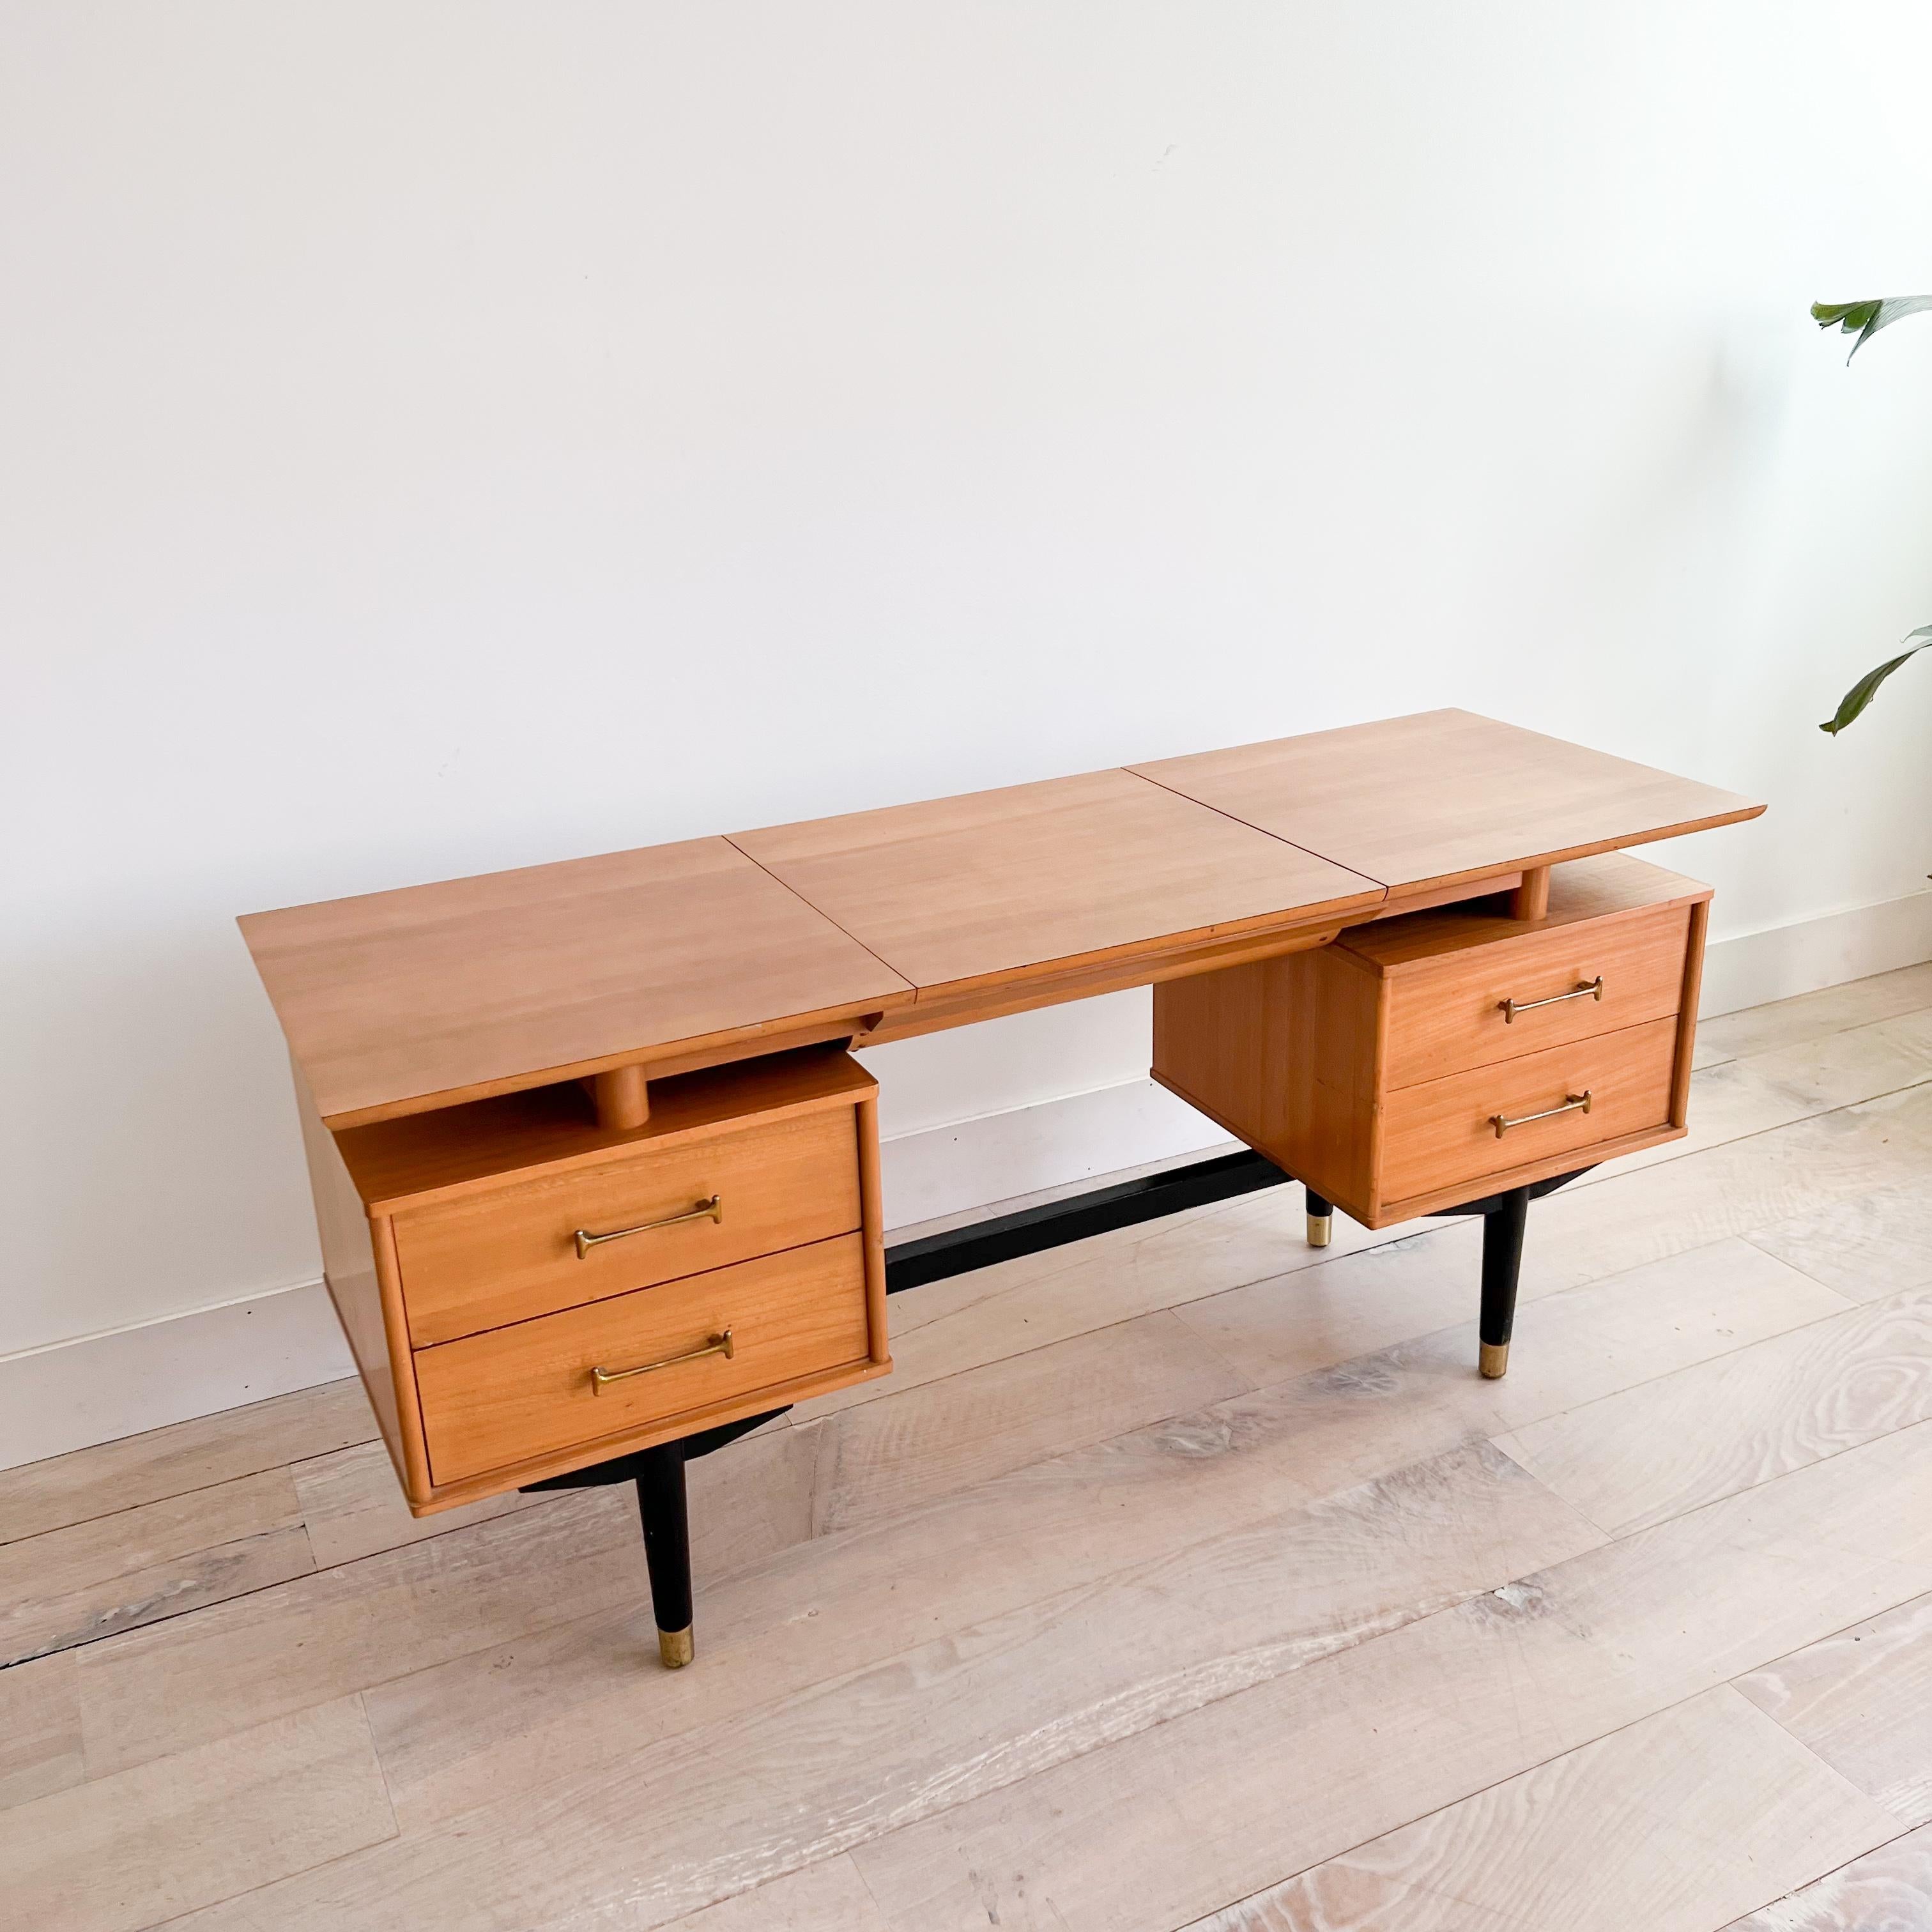 Mid century modern desk/vanity by Milo Baughman for the Today’s Living line by Drexel. Solid elm construction with brass “dog bone” hardware. Some light scuffing/scratching from age appropriate wear.

60”x20.5” 27.25”H

Knee clearance - 23.25” wide